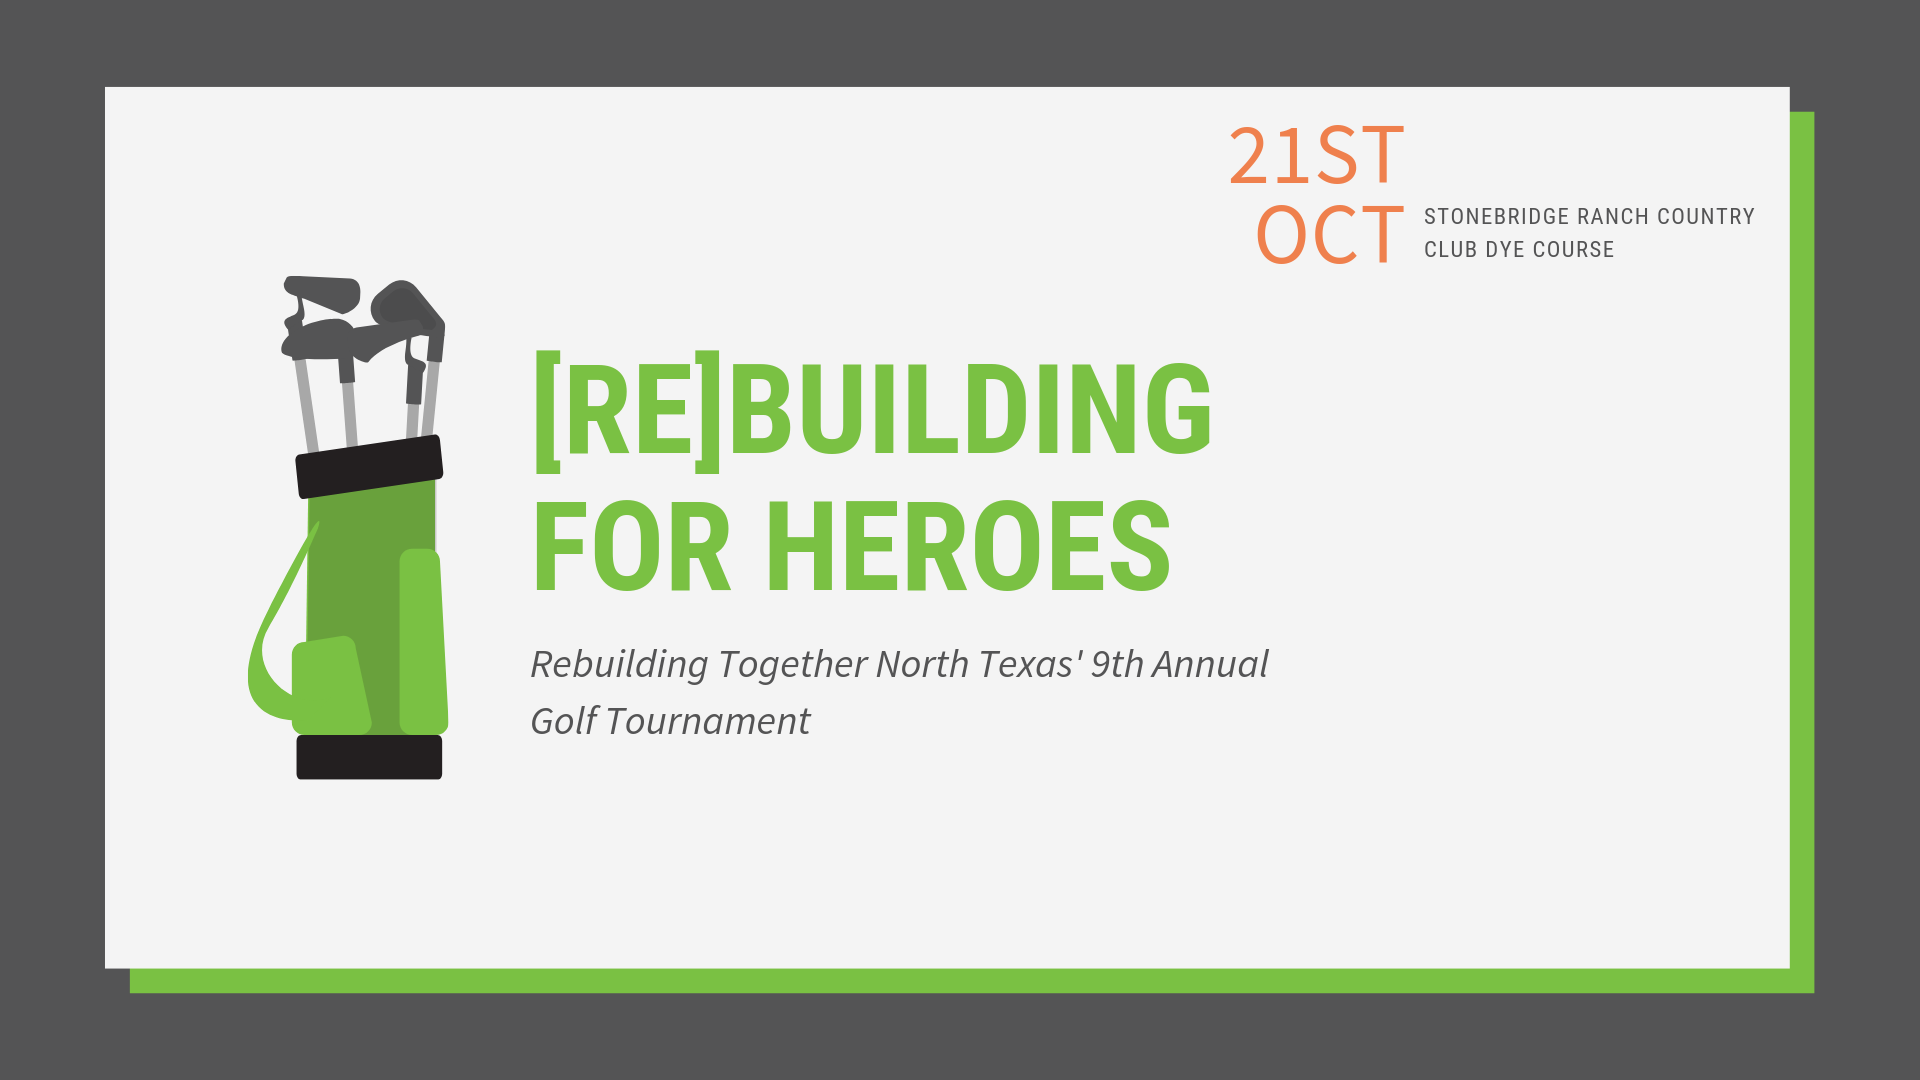 [Re]Building for Heroes 9th Annual Golf Tournament